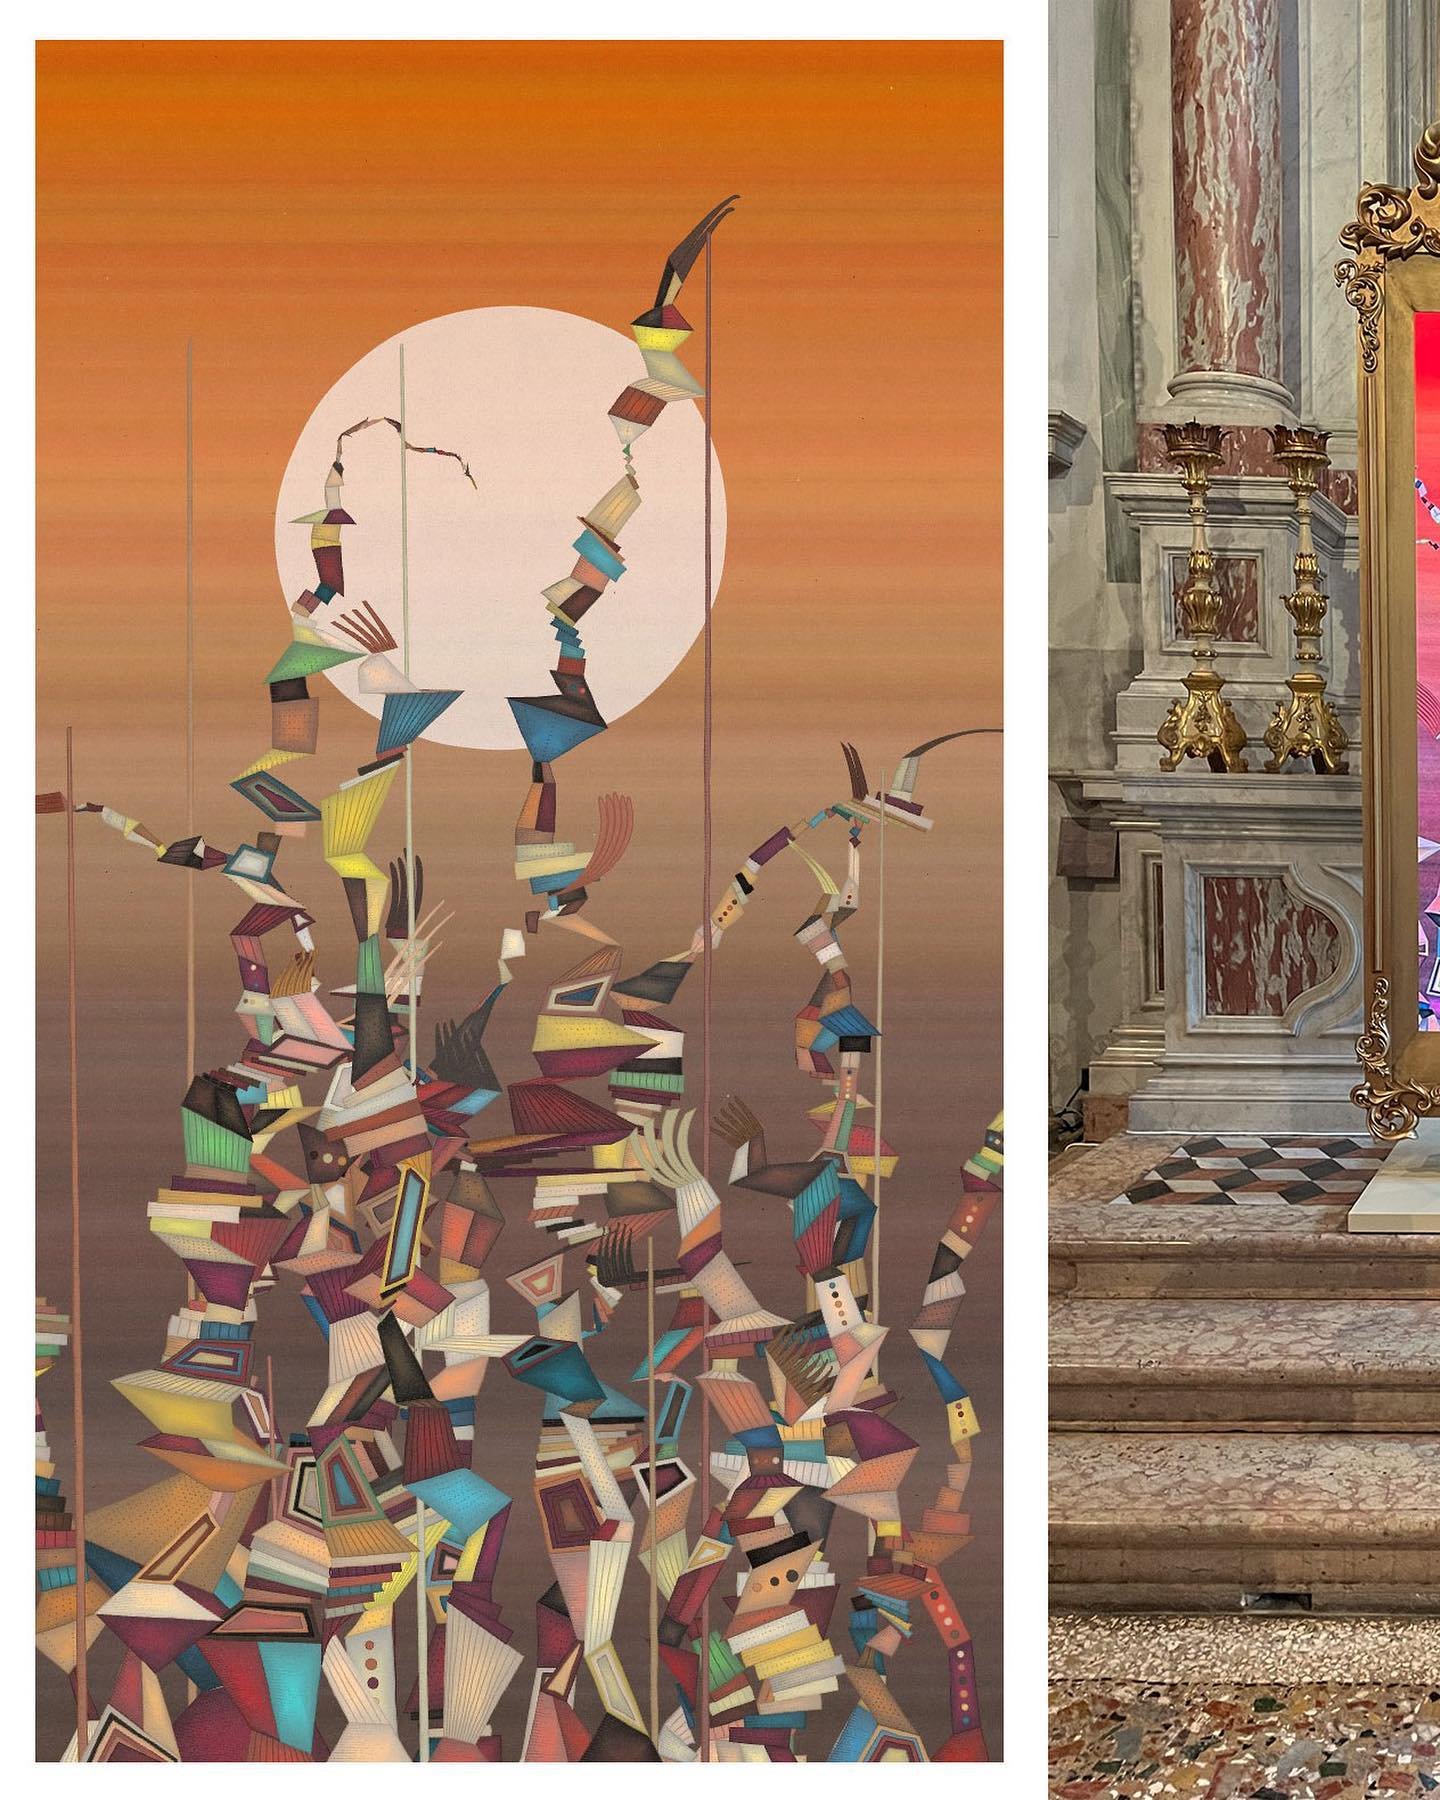 During the 2024 Venice Biennale, @brightmomentsgallery hosted their 10th and final immersive group show of digital art at the Scuola Grande San Giovanni. A gorgeous 14th century Venezian building&hellip; what a dream!

I was one of 60 artists invited